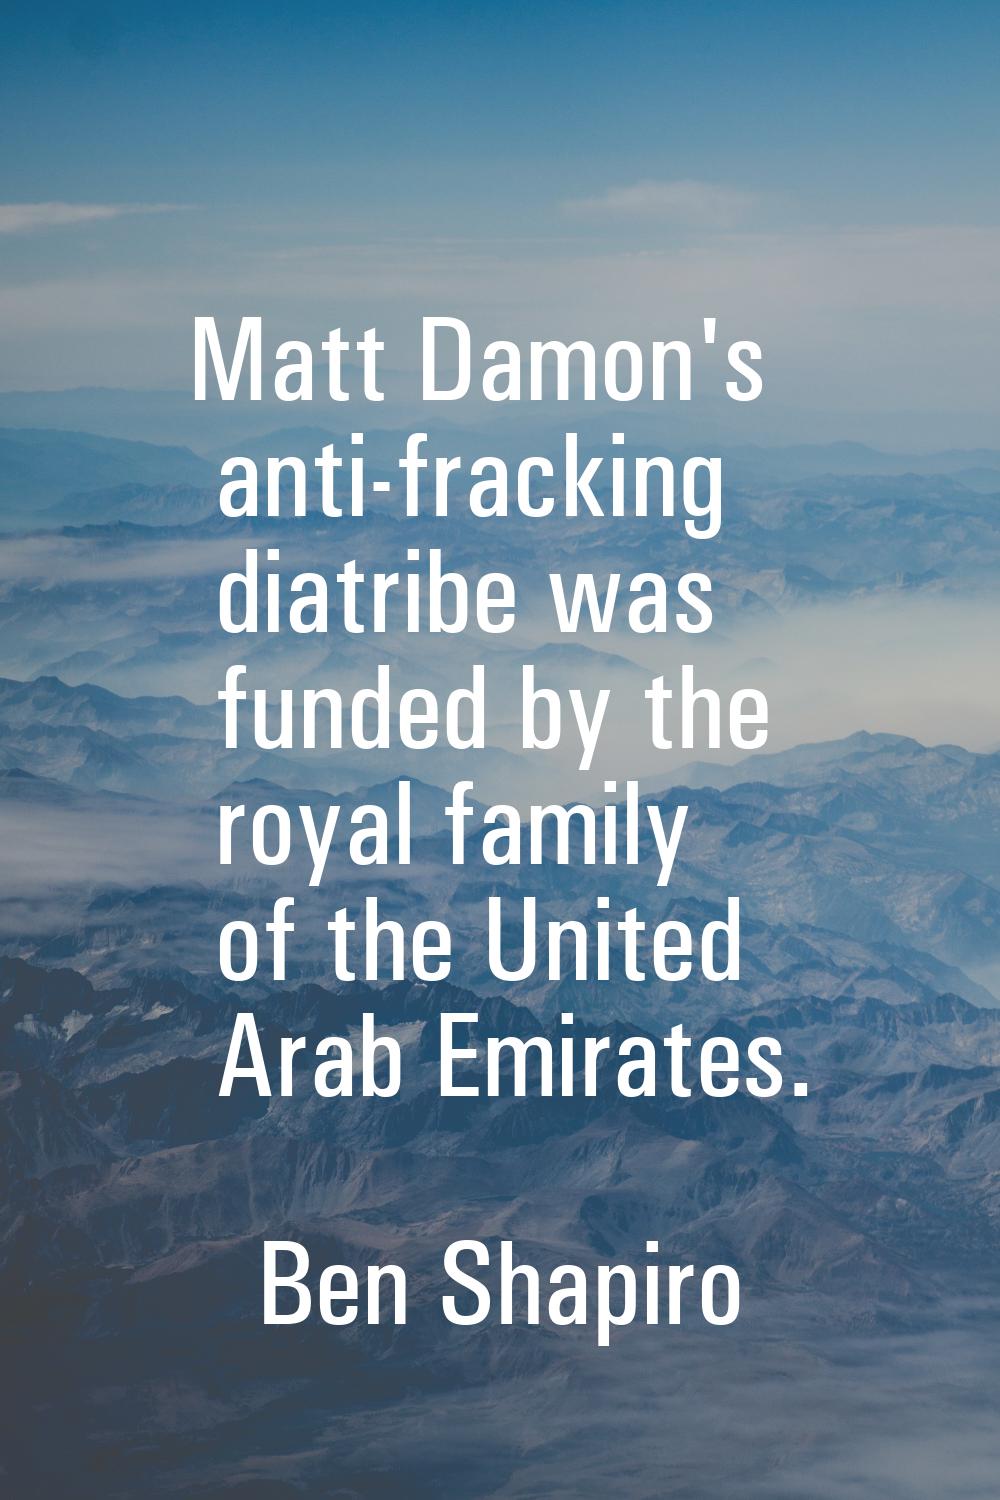 Matt Damon's anti-fracking diatribe was funded by the royal family of the United Arab Emirates.